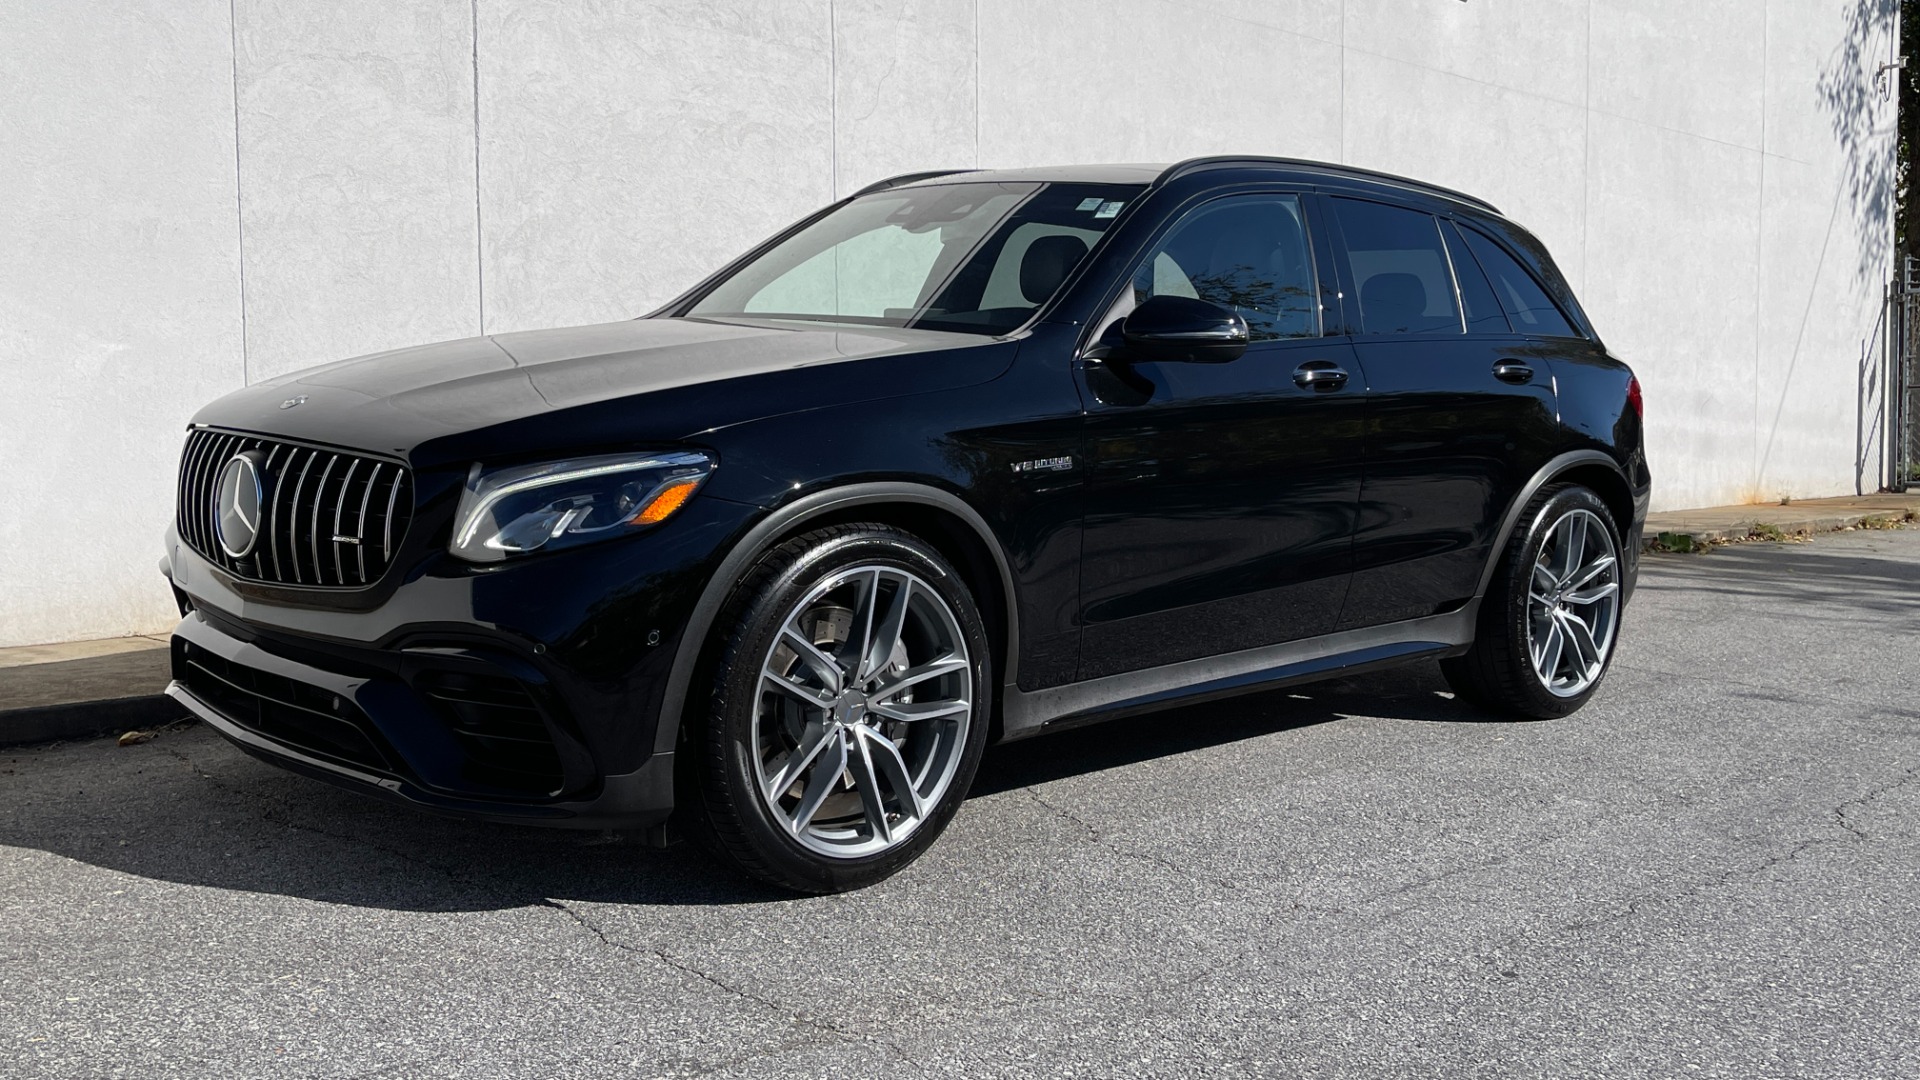 Used 2019 Mercedes-Benz GLC AMG GLC 63 / DRIVER ASSIST / AMG EXHAUST / CARBON FIBER / MULTIMEDIA for sale $61,995 at Formula Imports in Charlotte NC 28227 2